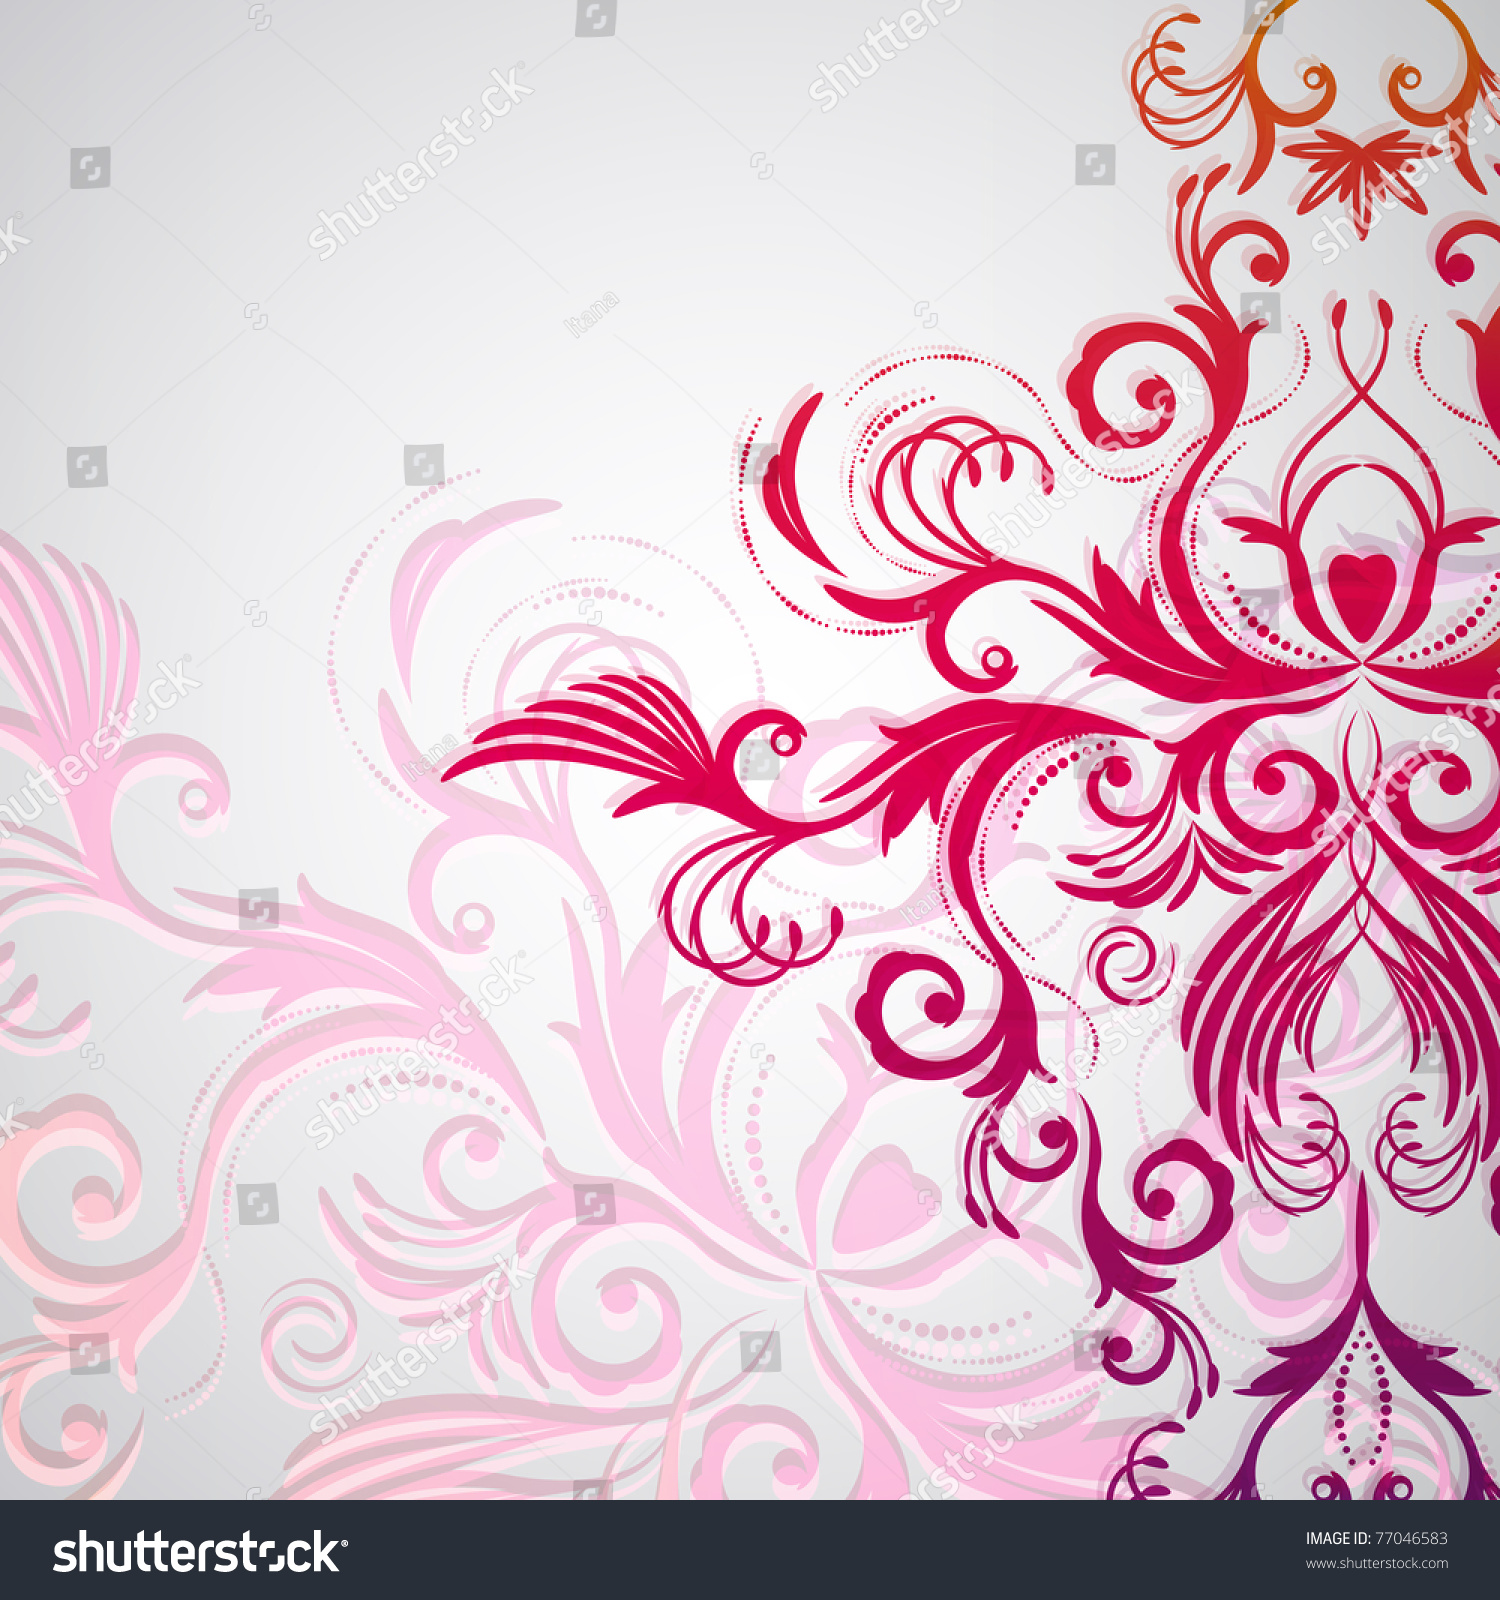 Abstract Floral Background With Oriental Flowers. Stock Photo 77046583